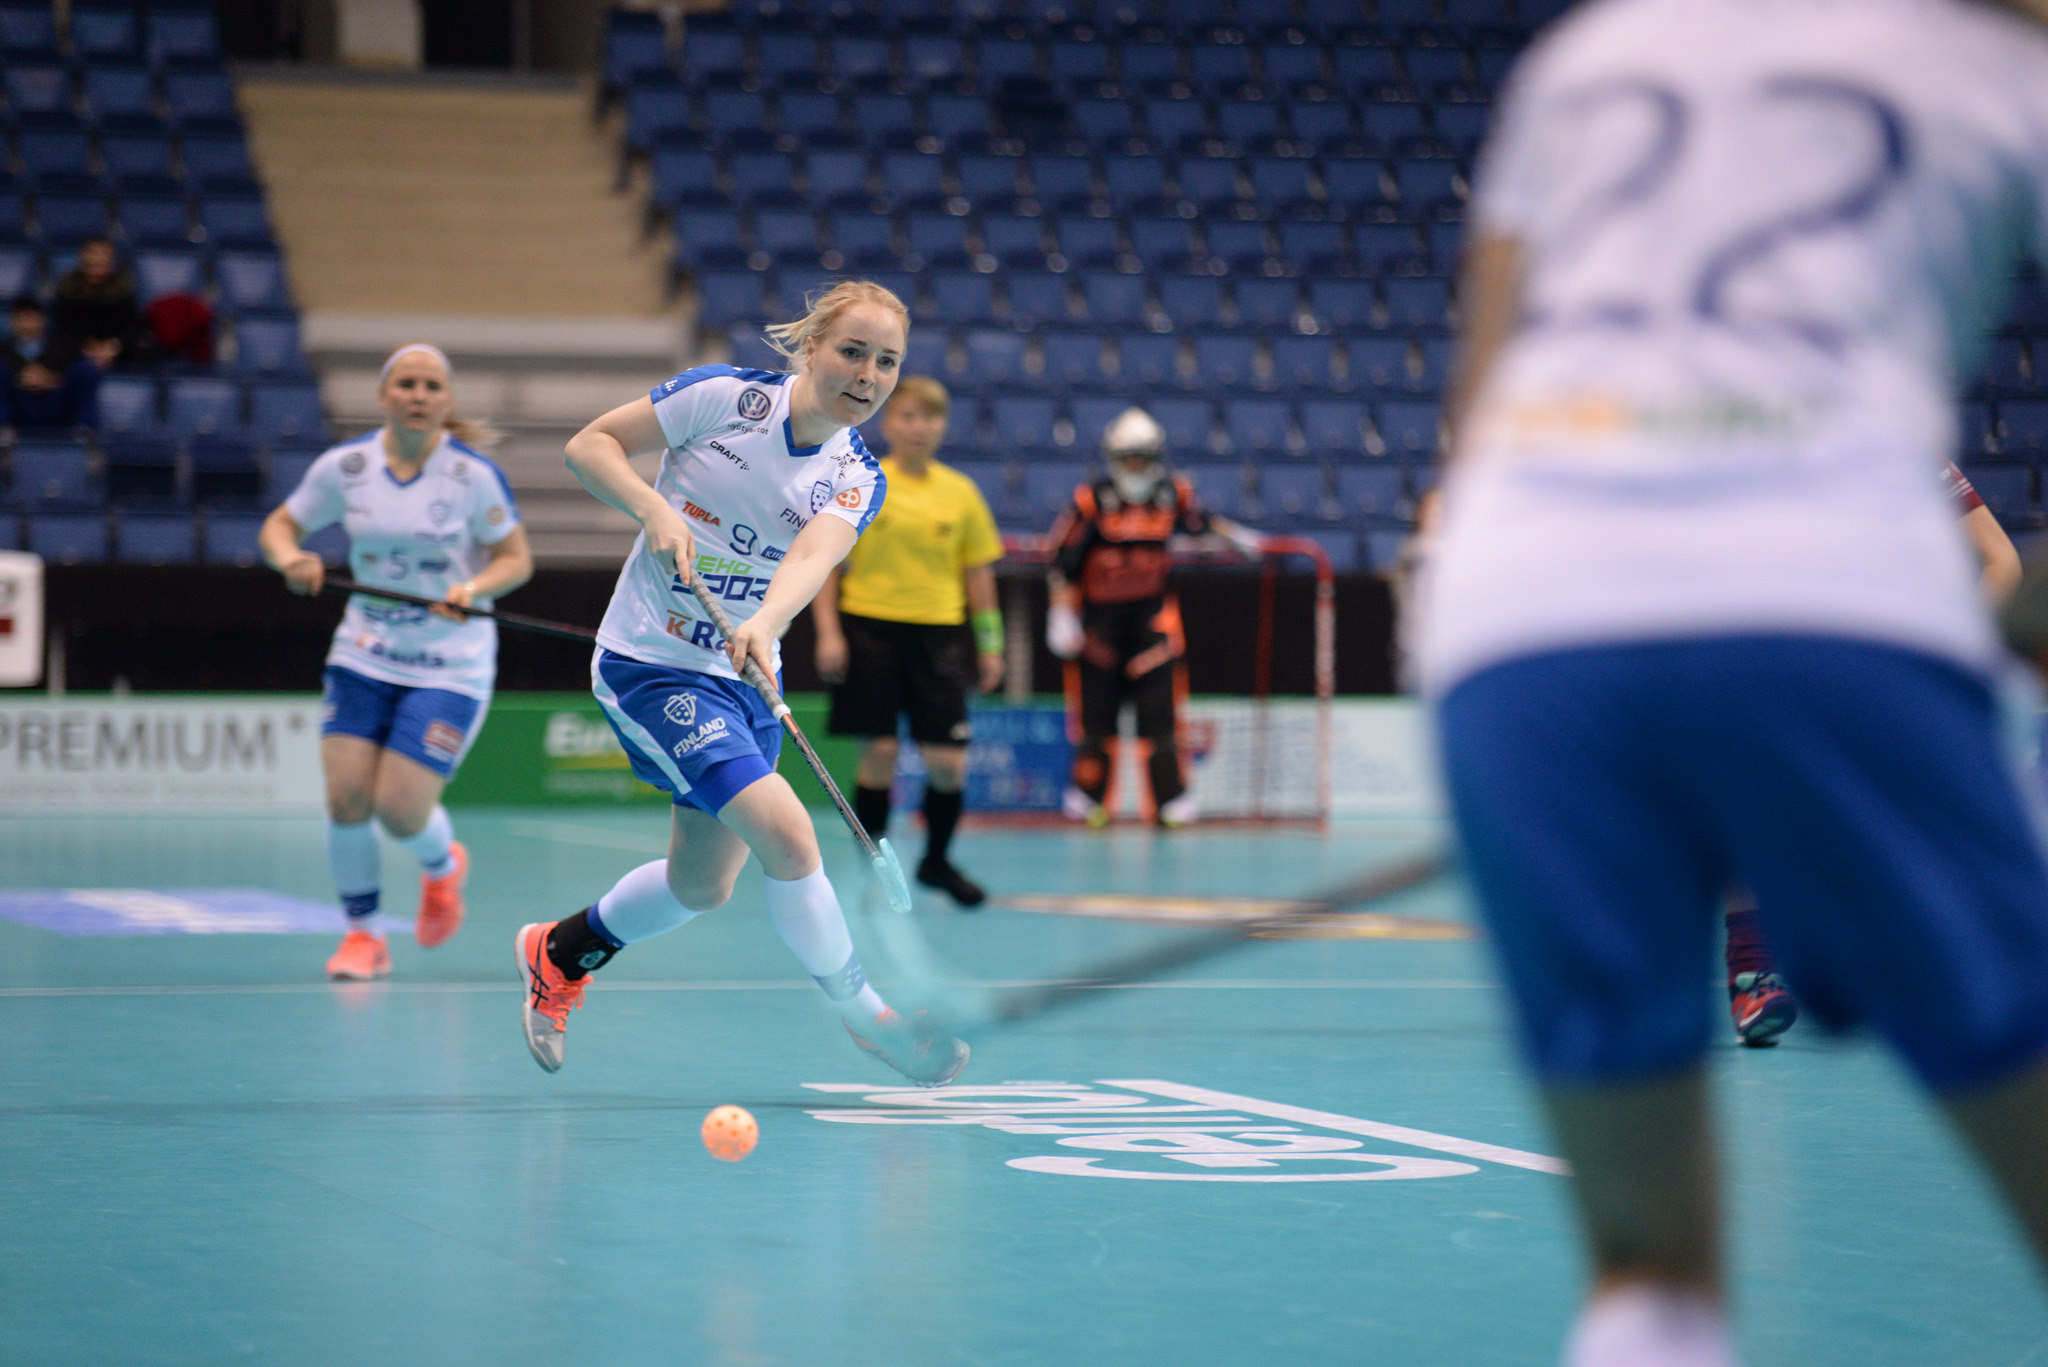 Finland also showed their class at today's championships with a 12-1 demolition of Latvia ©IFF